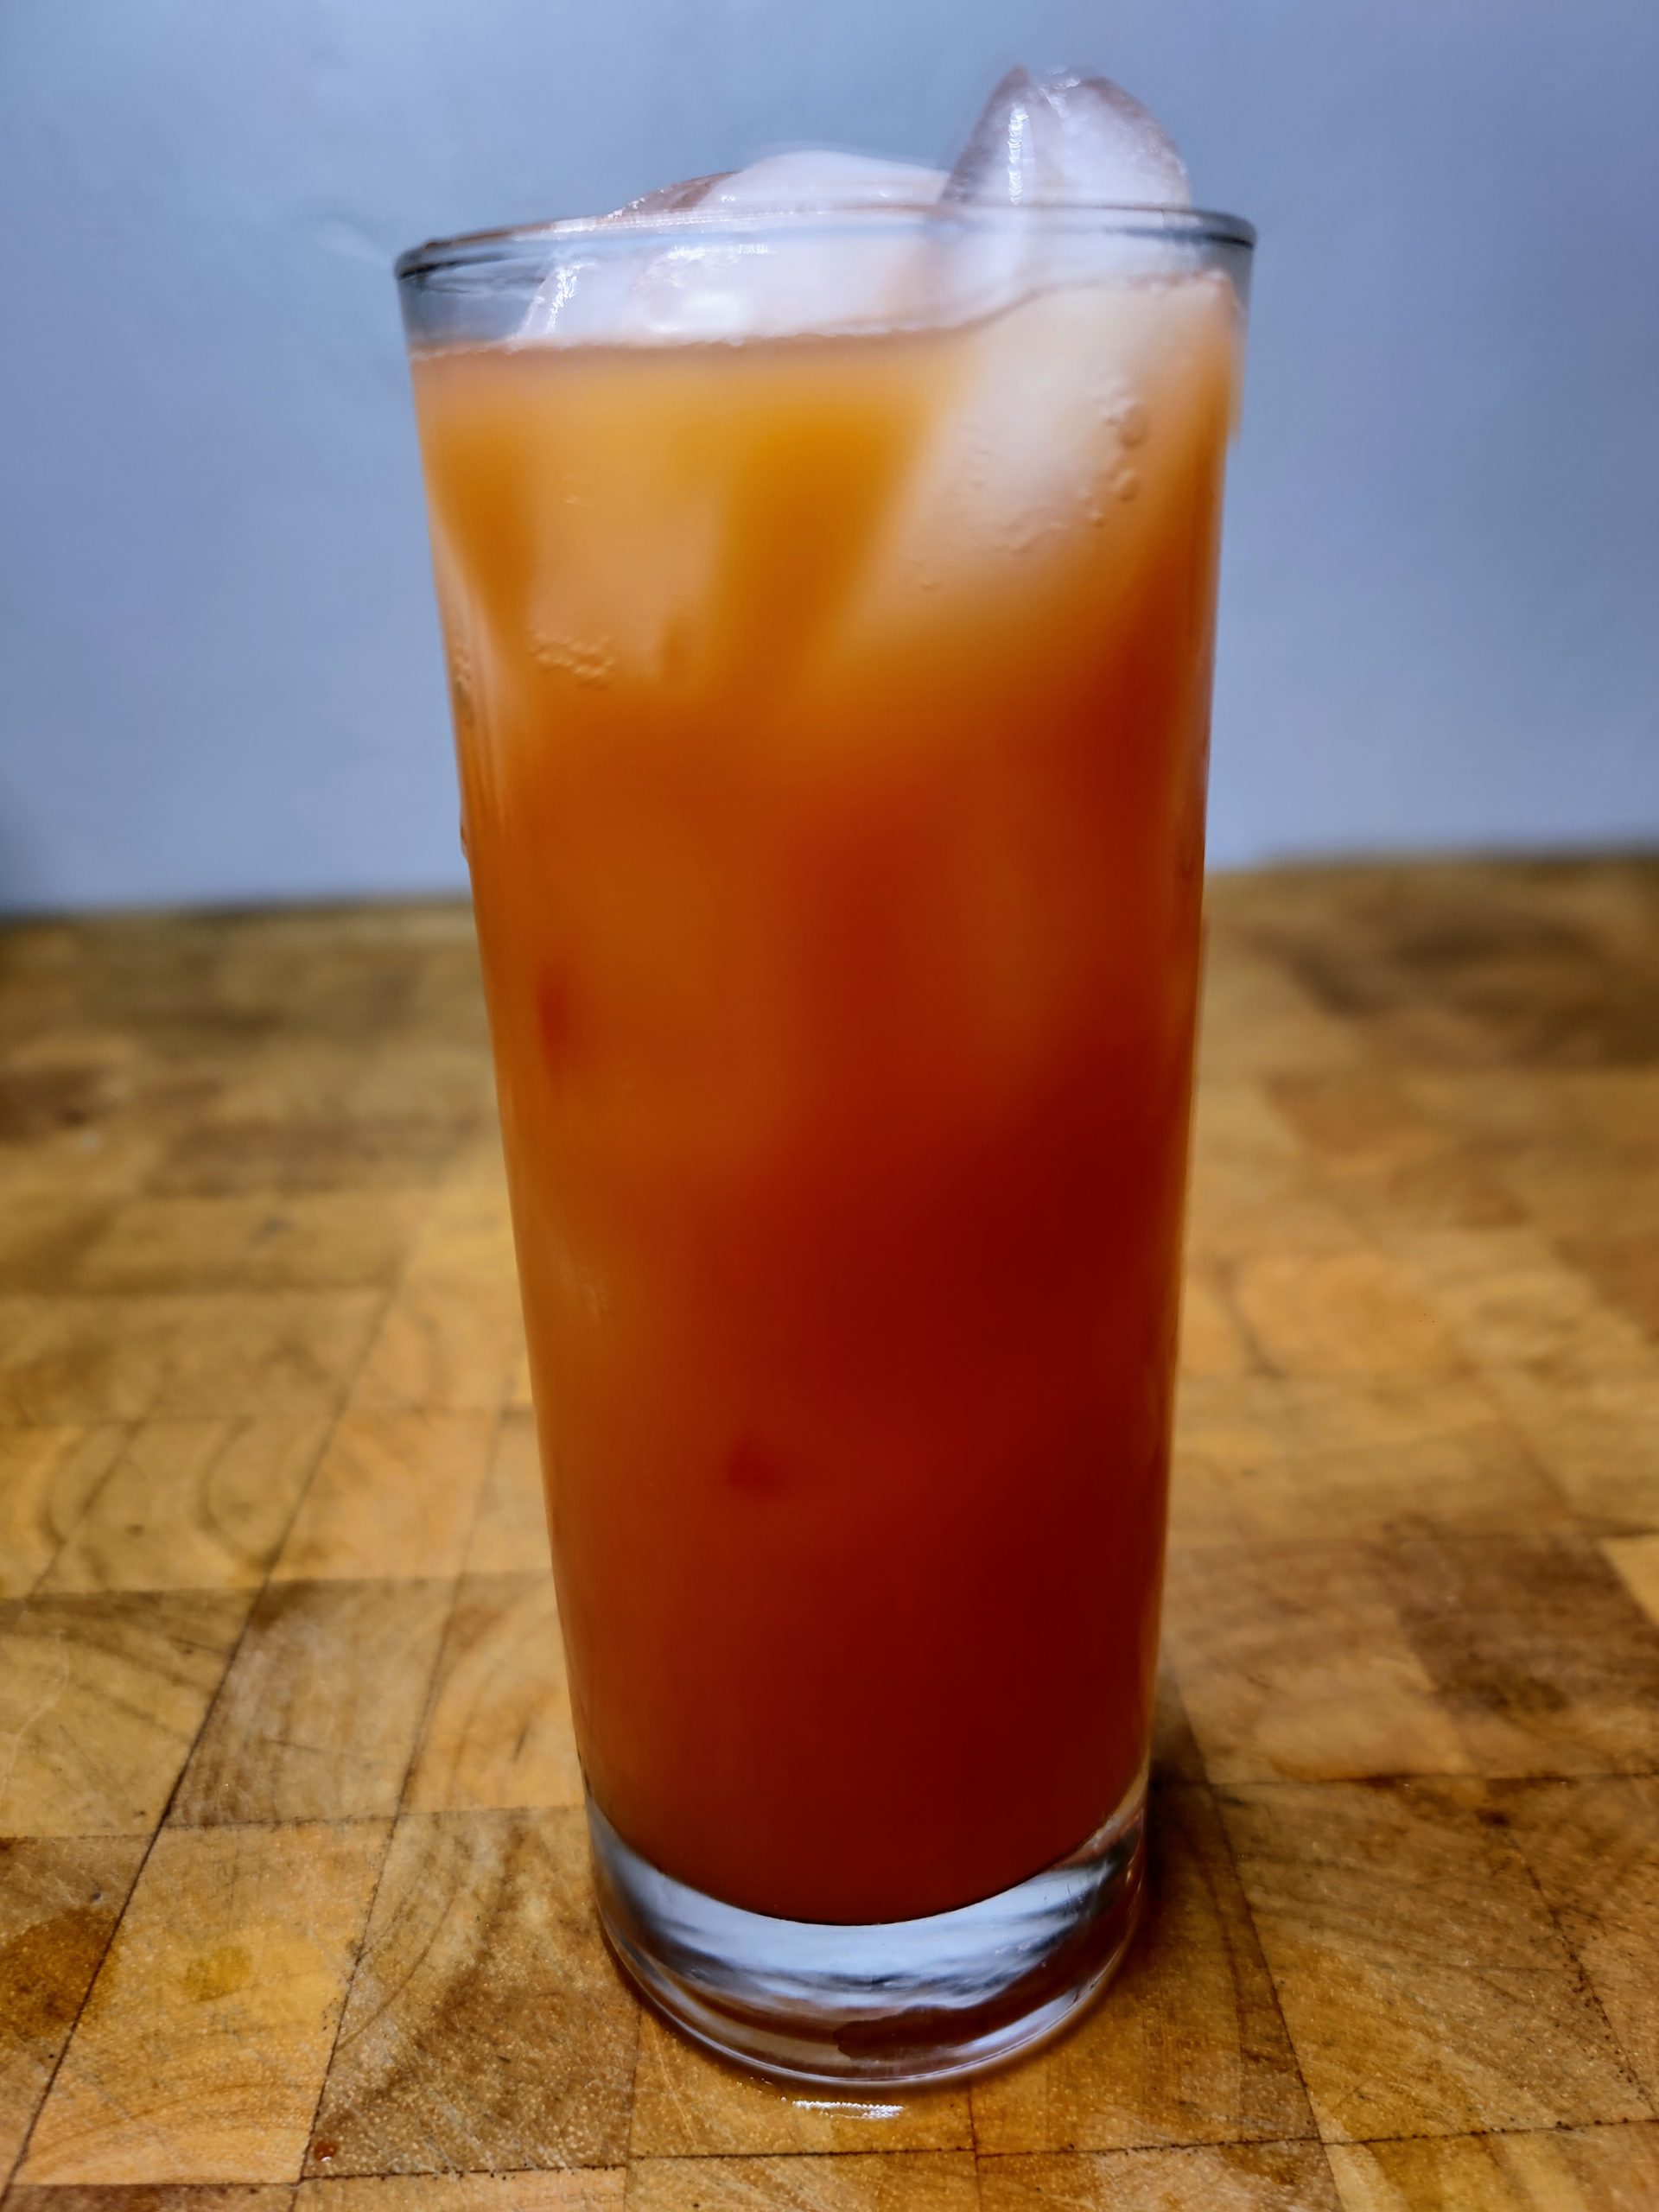 red death drink in a highball glass on a wooden table